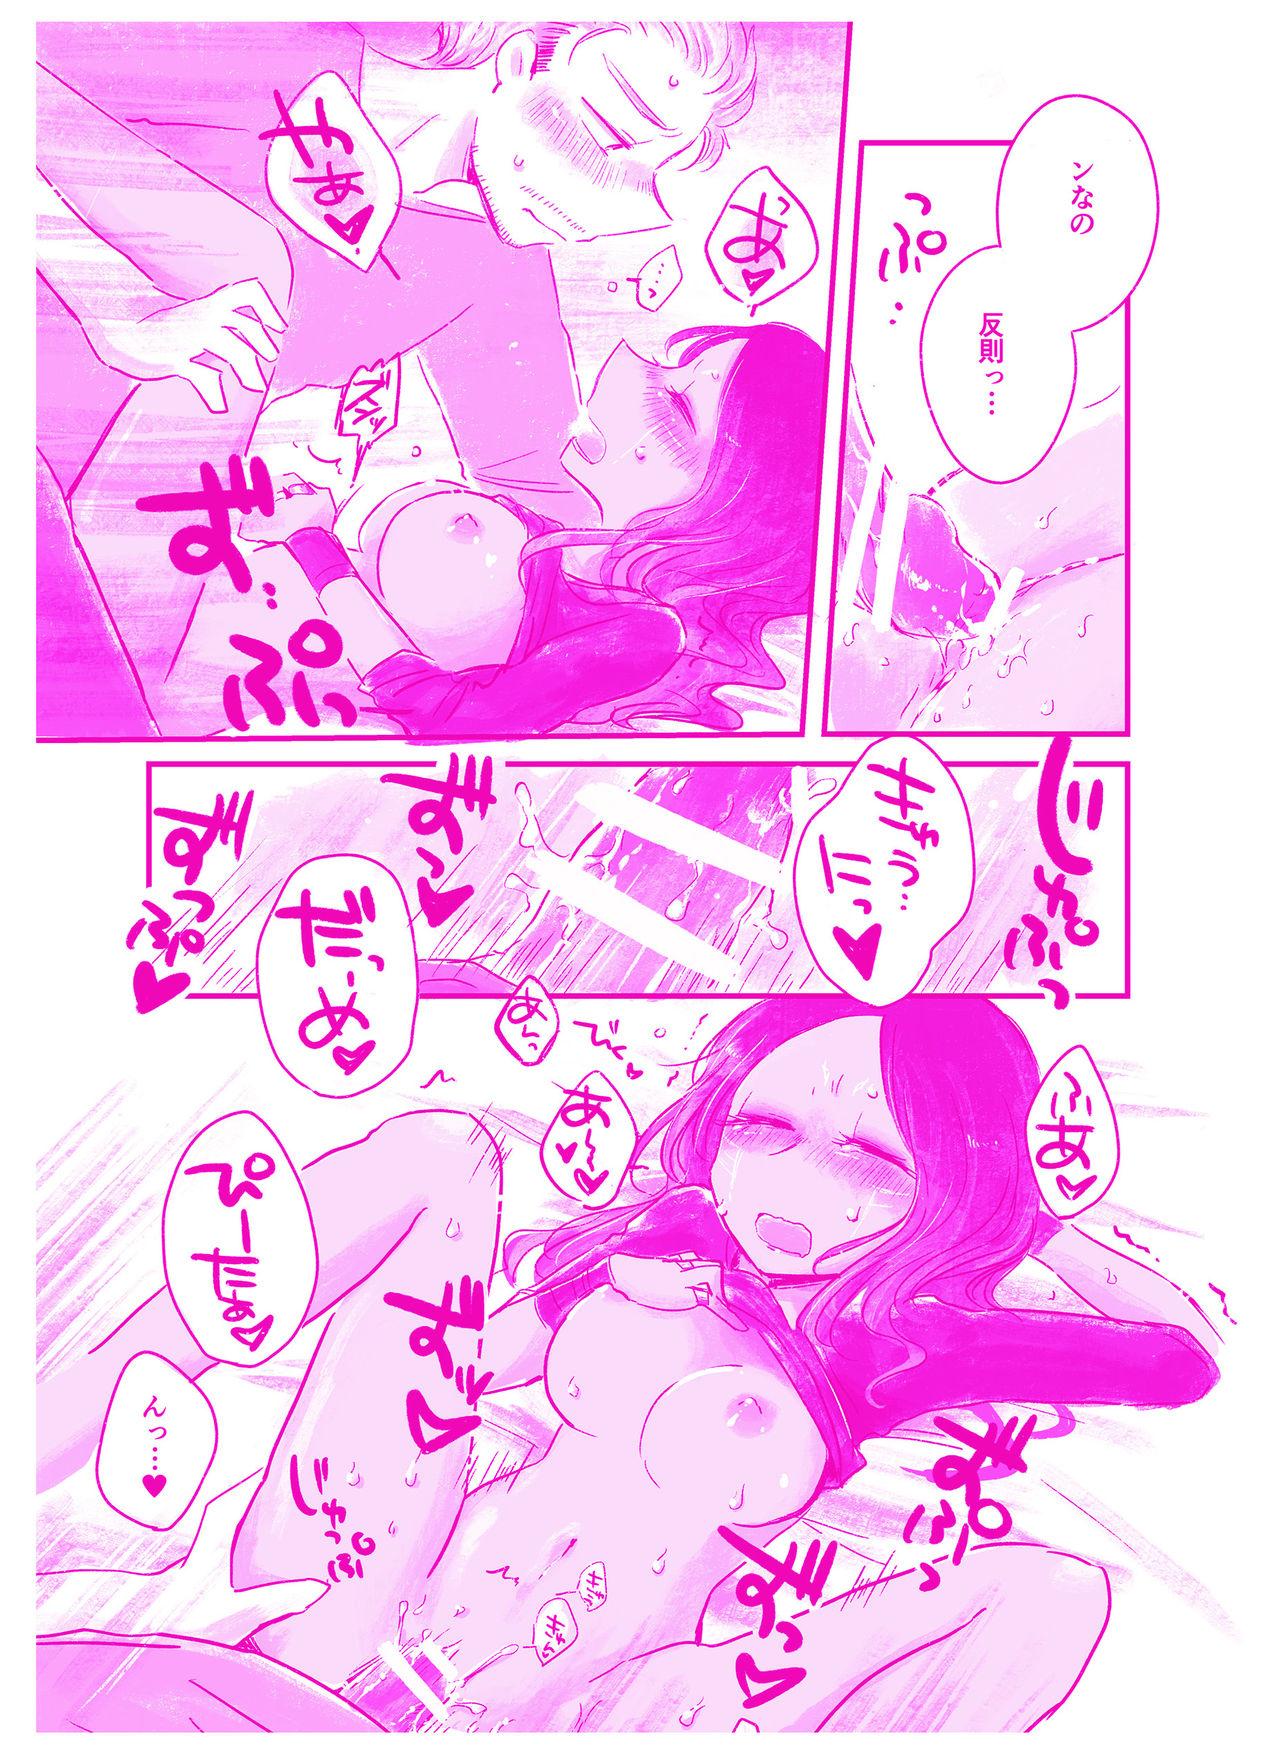 Rica 言われてみてえもんだ - Guardians of the galaxy 4some - Page 12